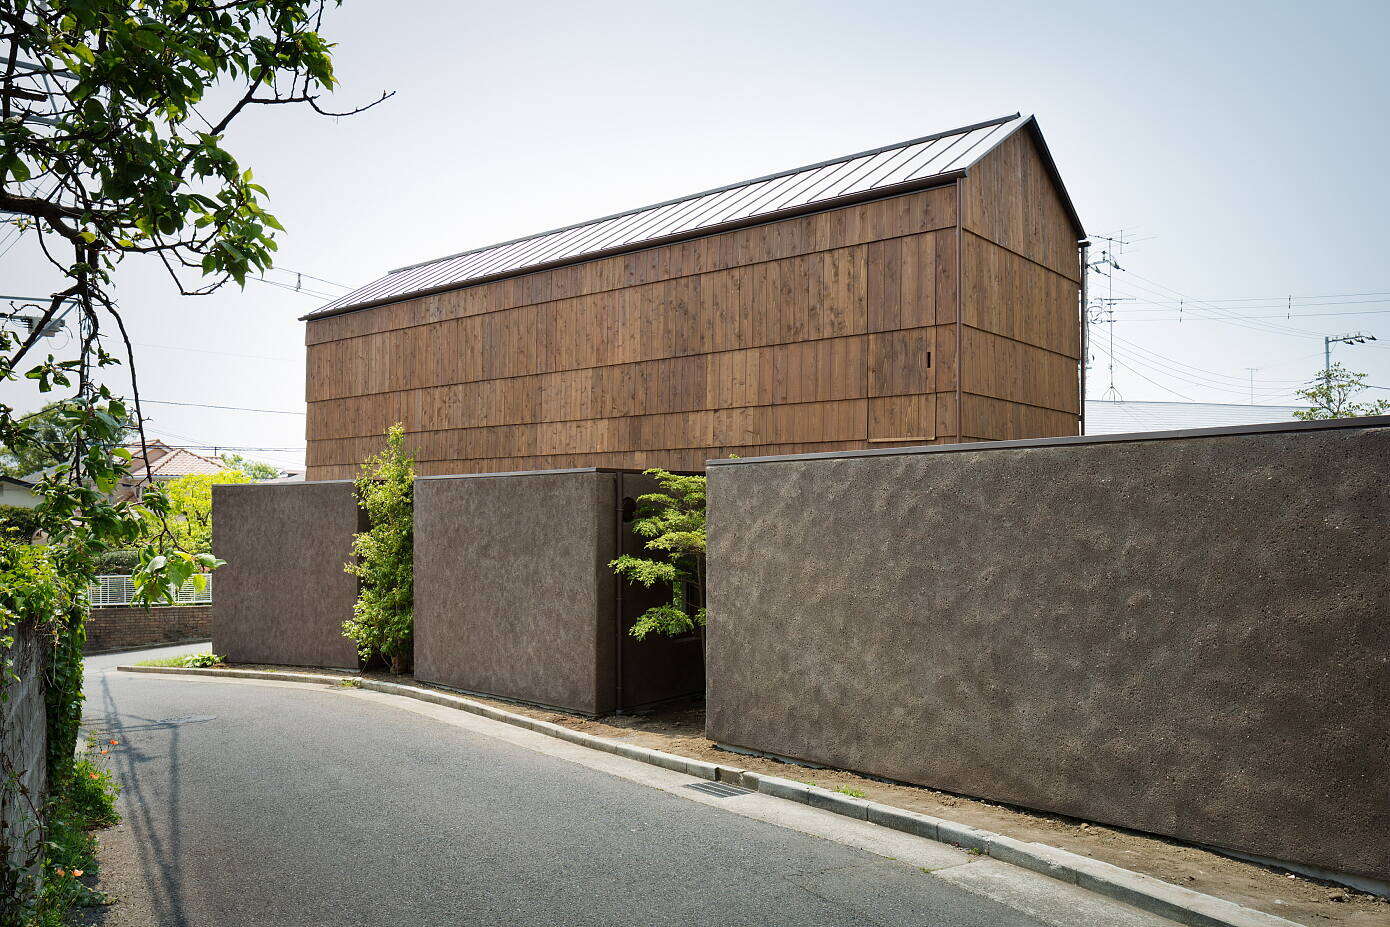 House for Oiso by Lina Ghotmeh – Architecture